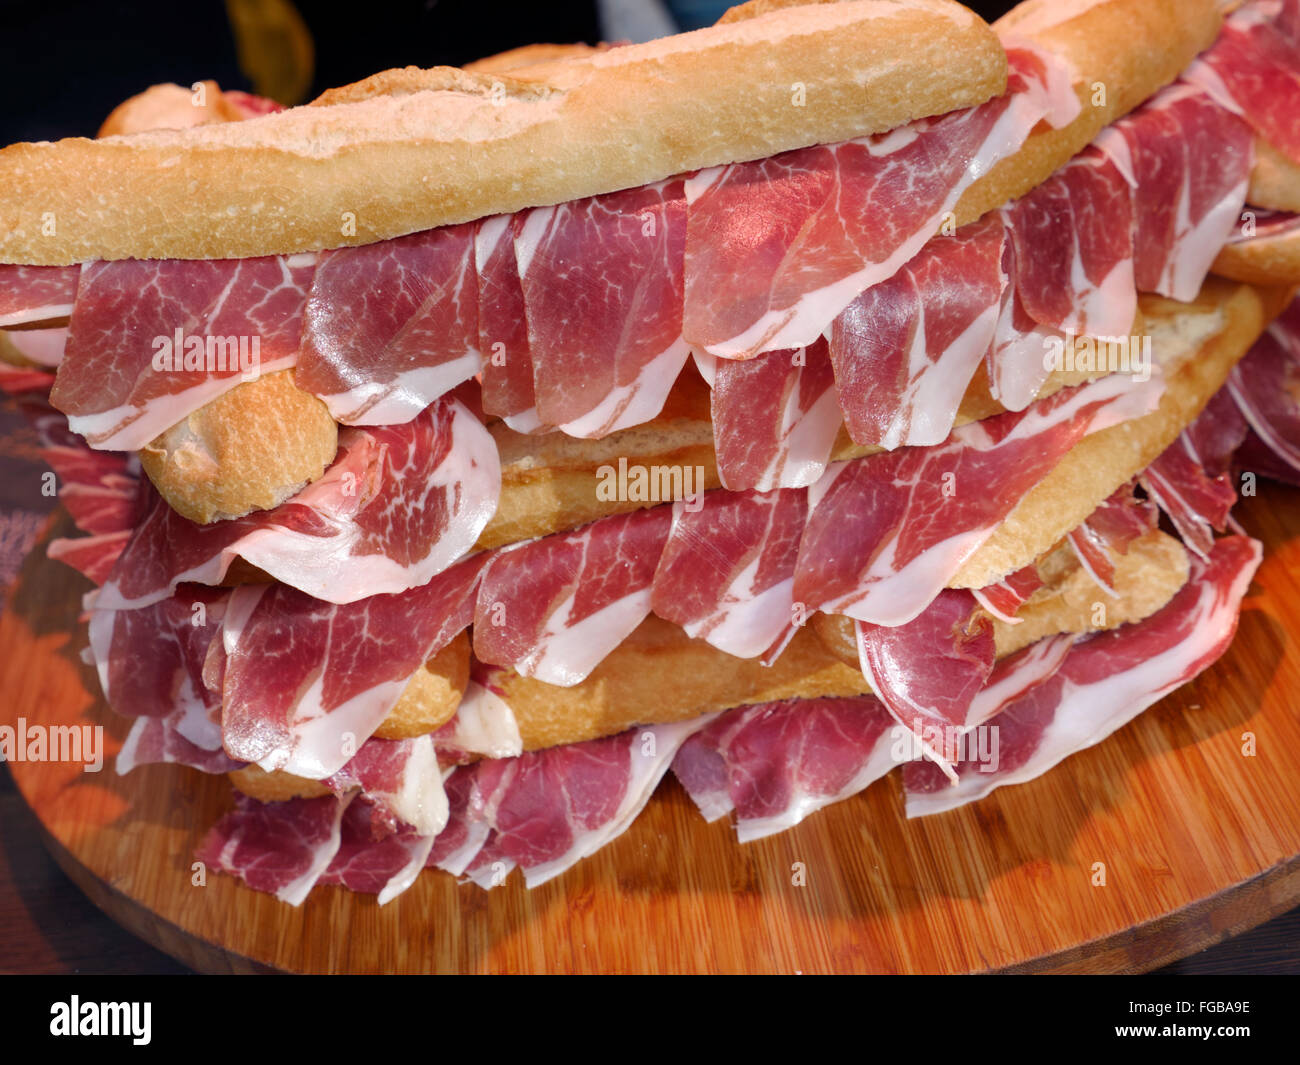 Freshly made stack of Jamón serrano Spanish ham baguette sandwiches on display for sale in London delicatessen Stock Photo